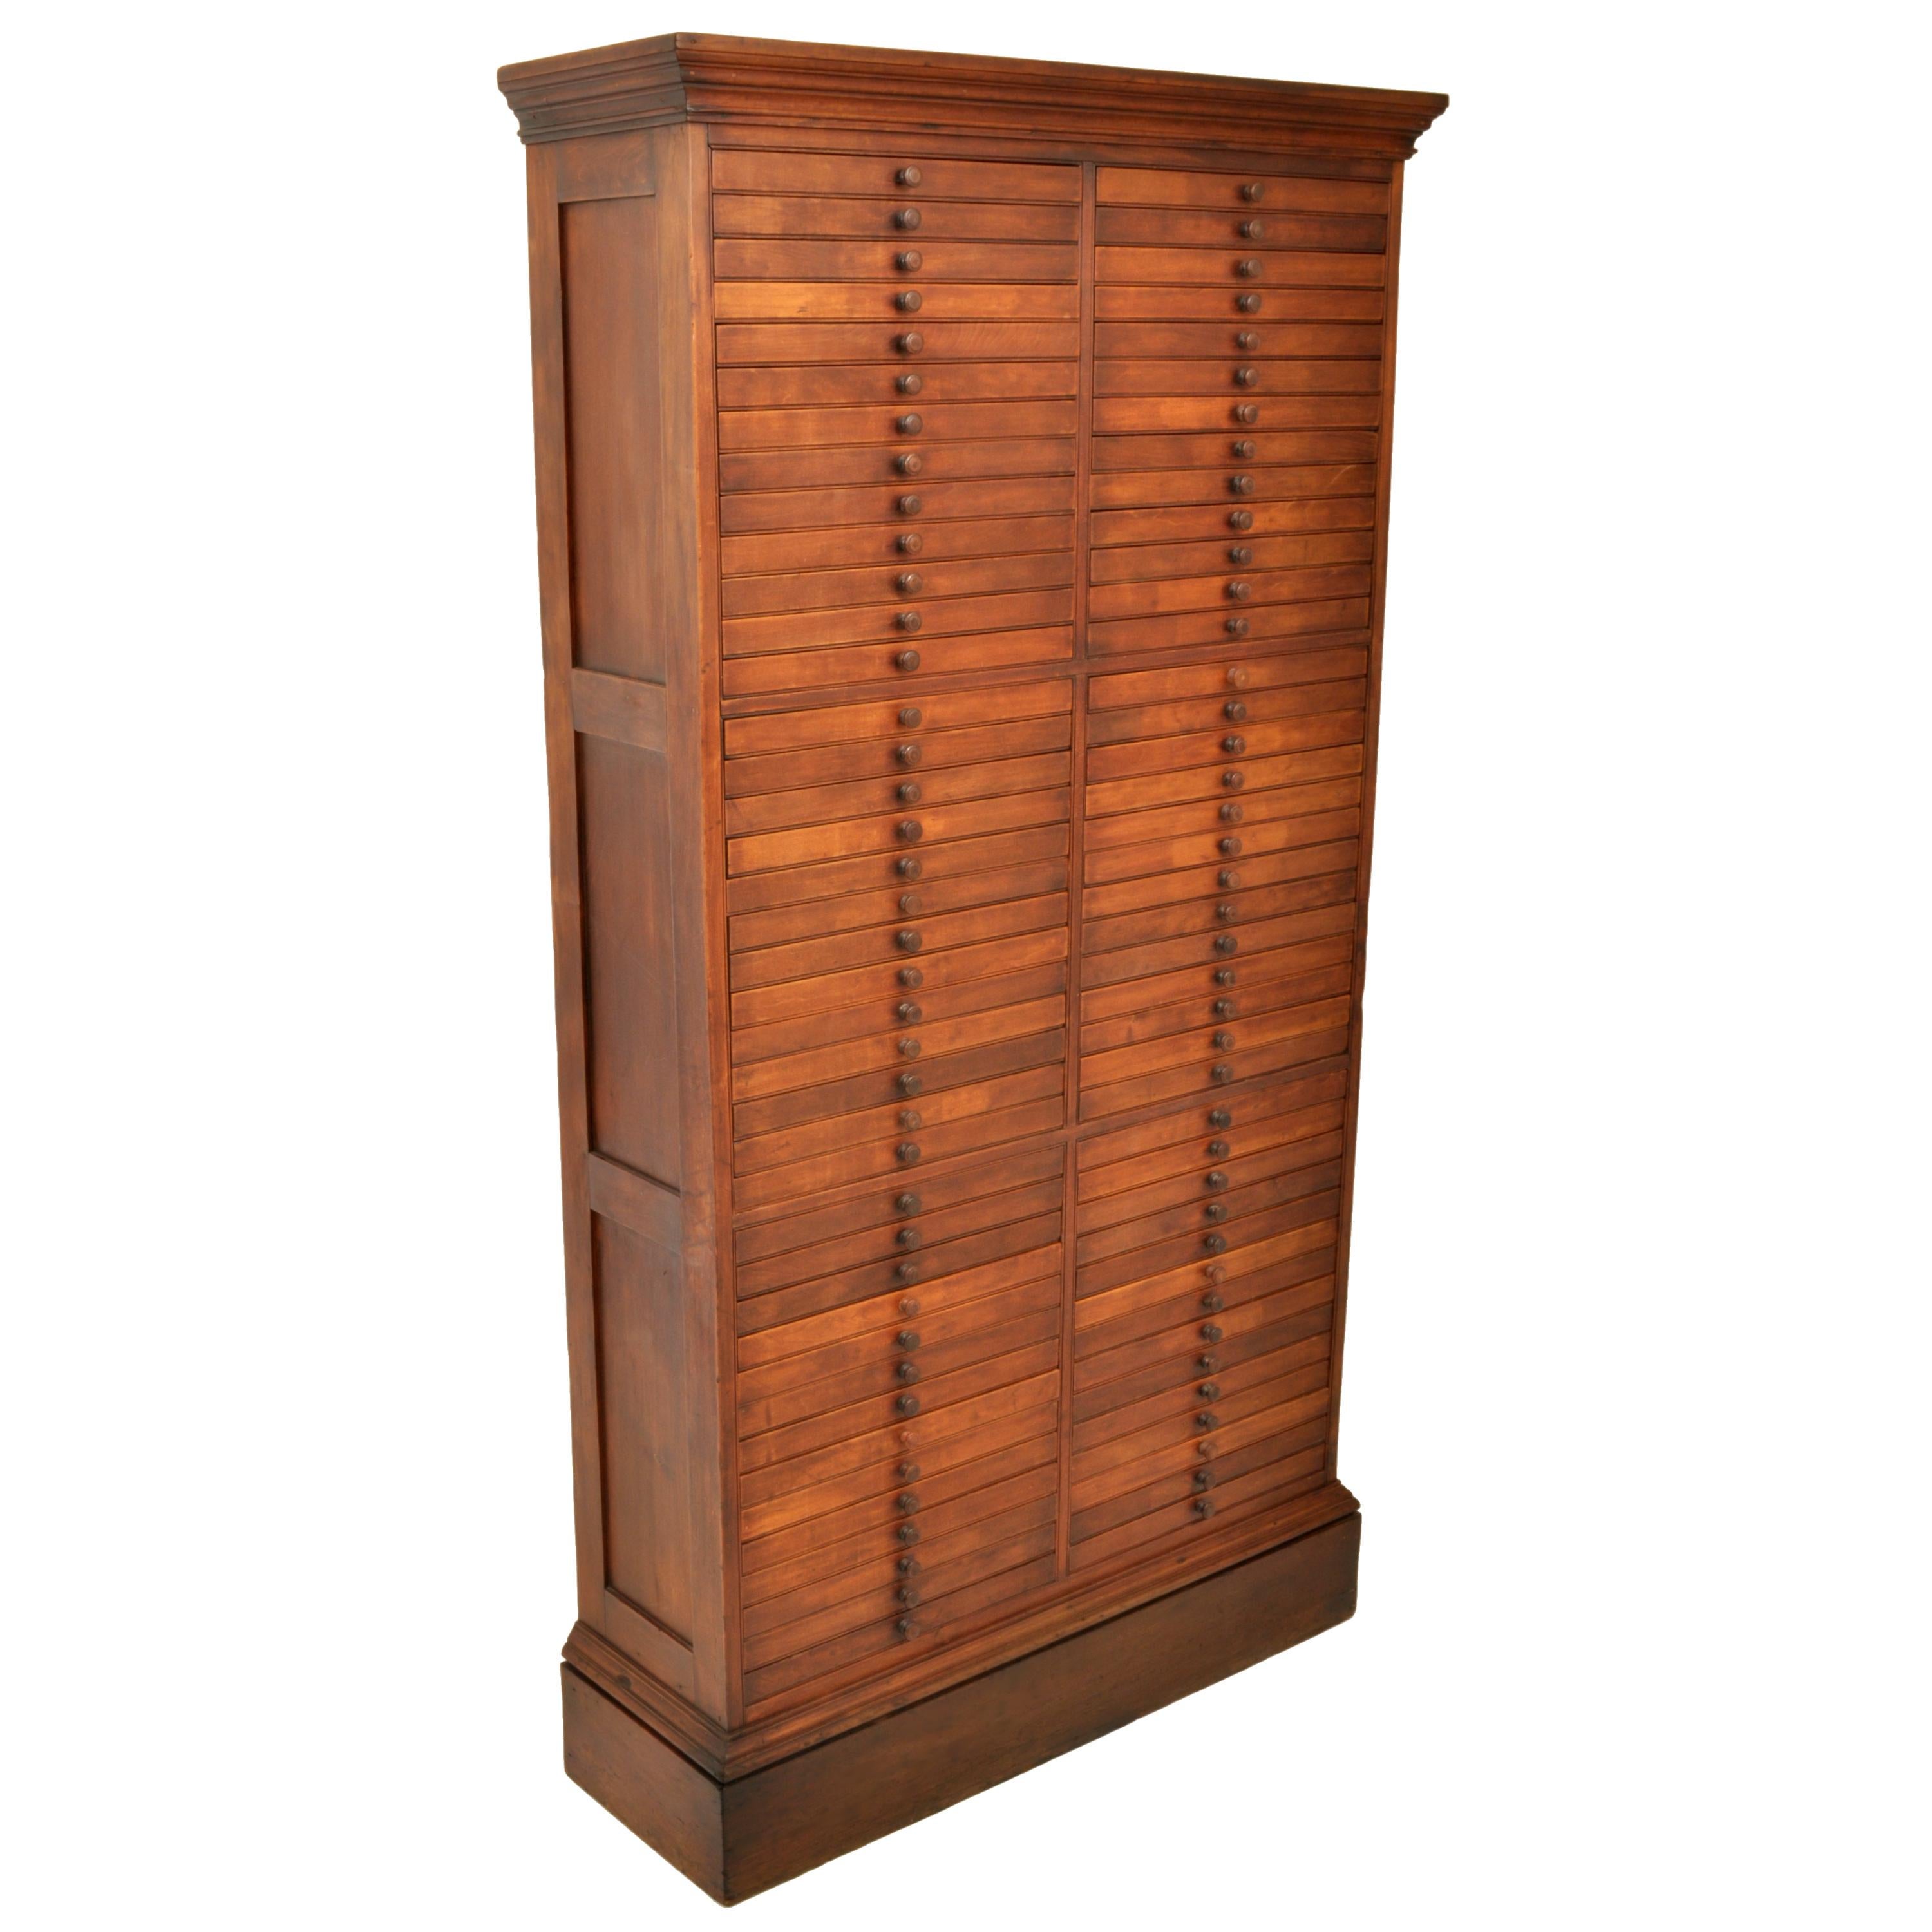 A late 19th century walnut printer's cabinet, circa 1890.
The cabinet of rare and unusual size, having a stepped crown to the top and standing on a plinth base, the cabinet having two banks of drawers, each side with 40 drawers. The sides of the